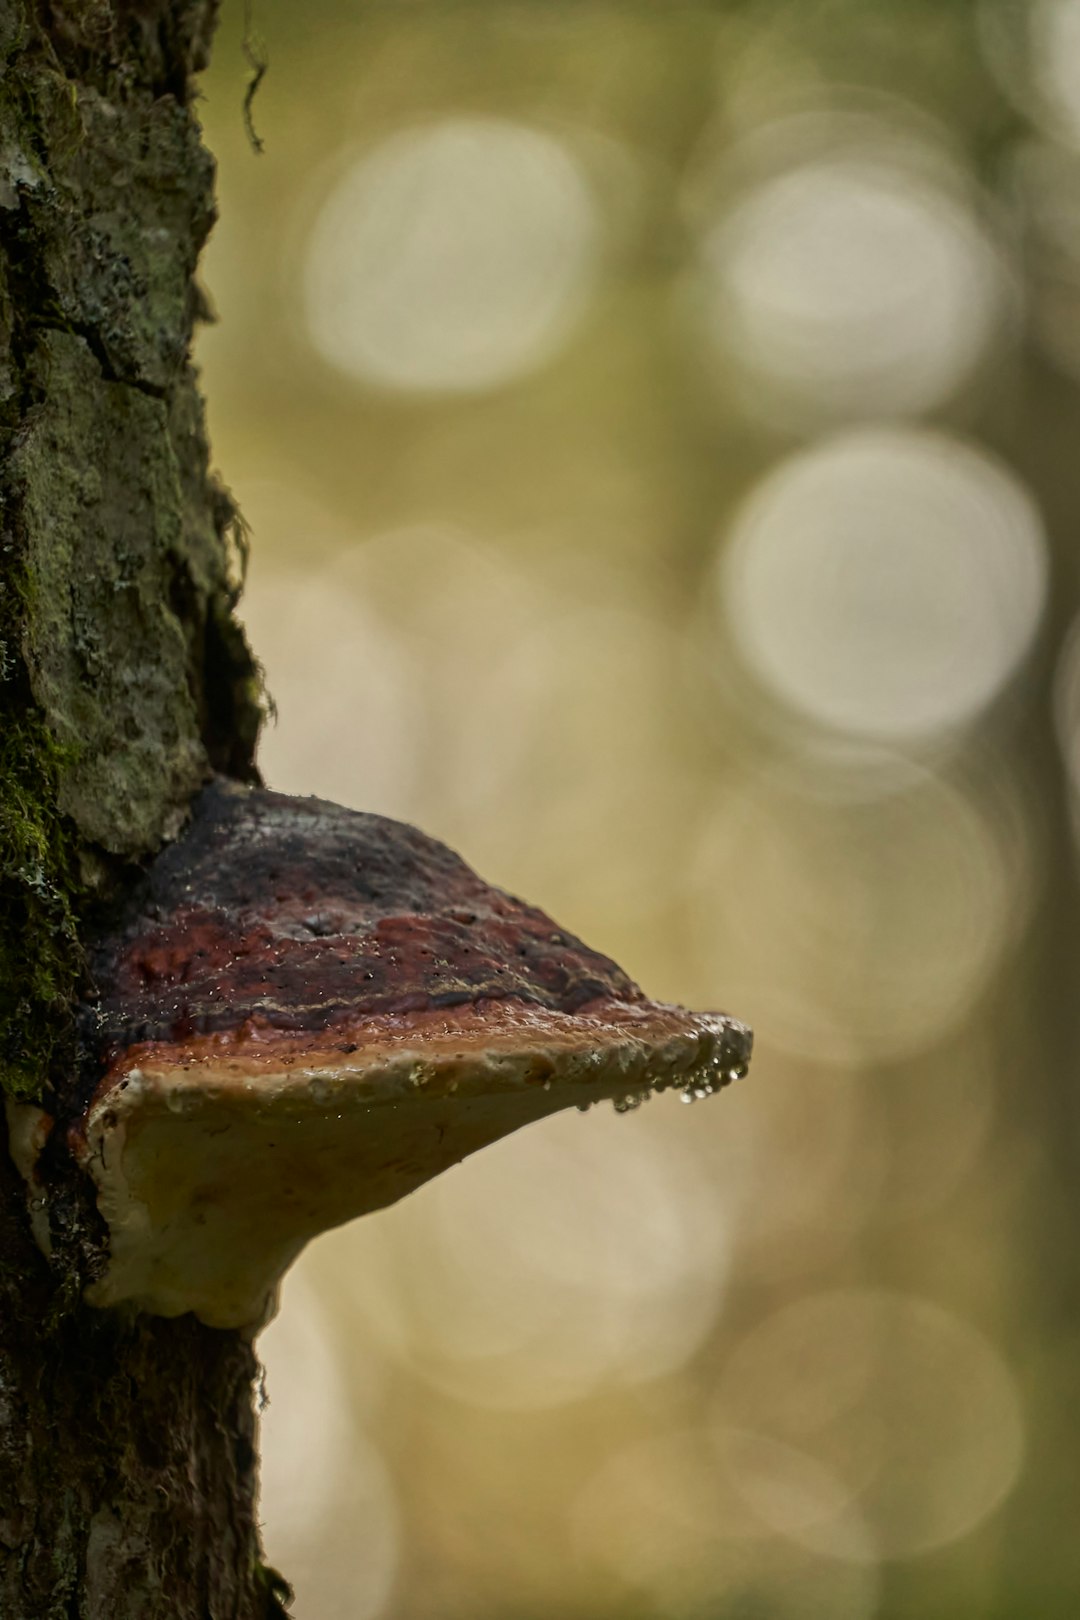 brown and white mushroom on tree trunk